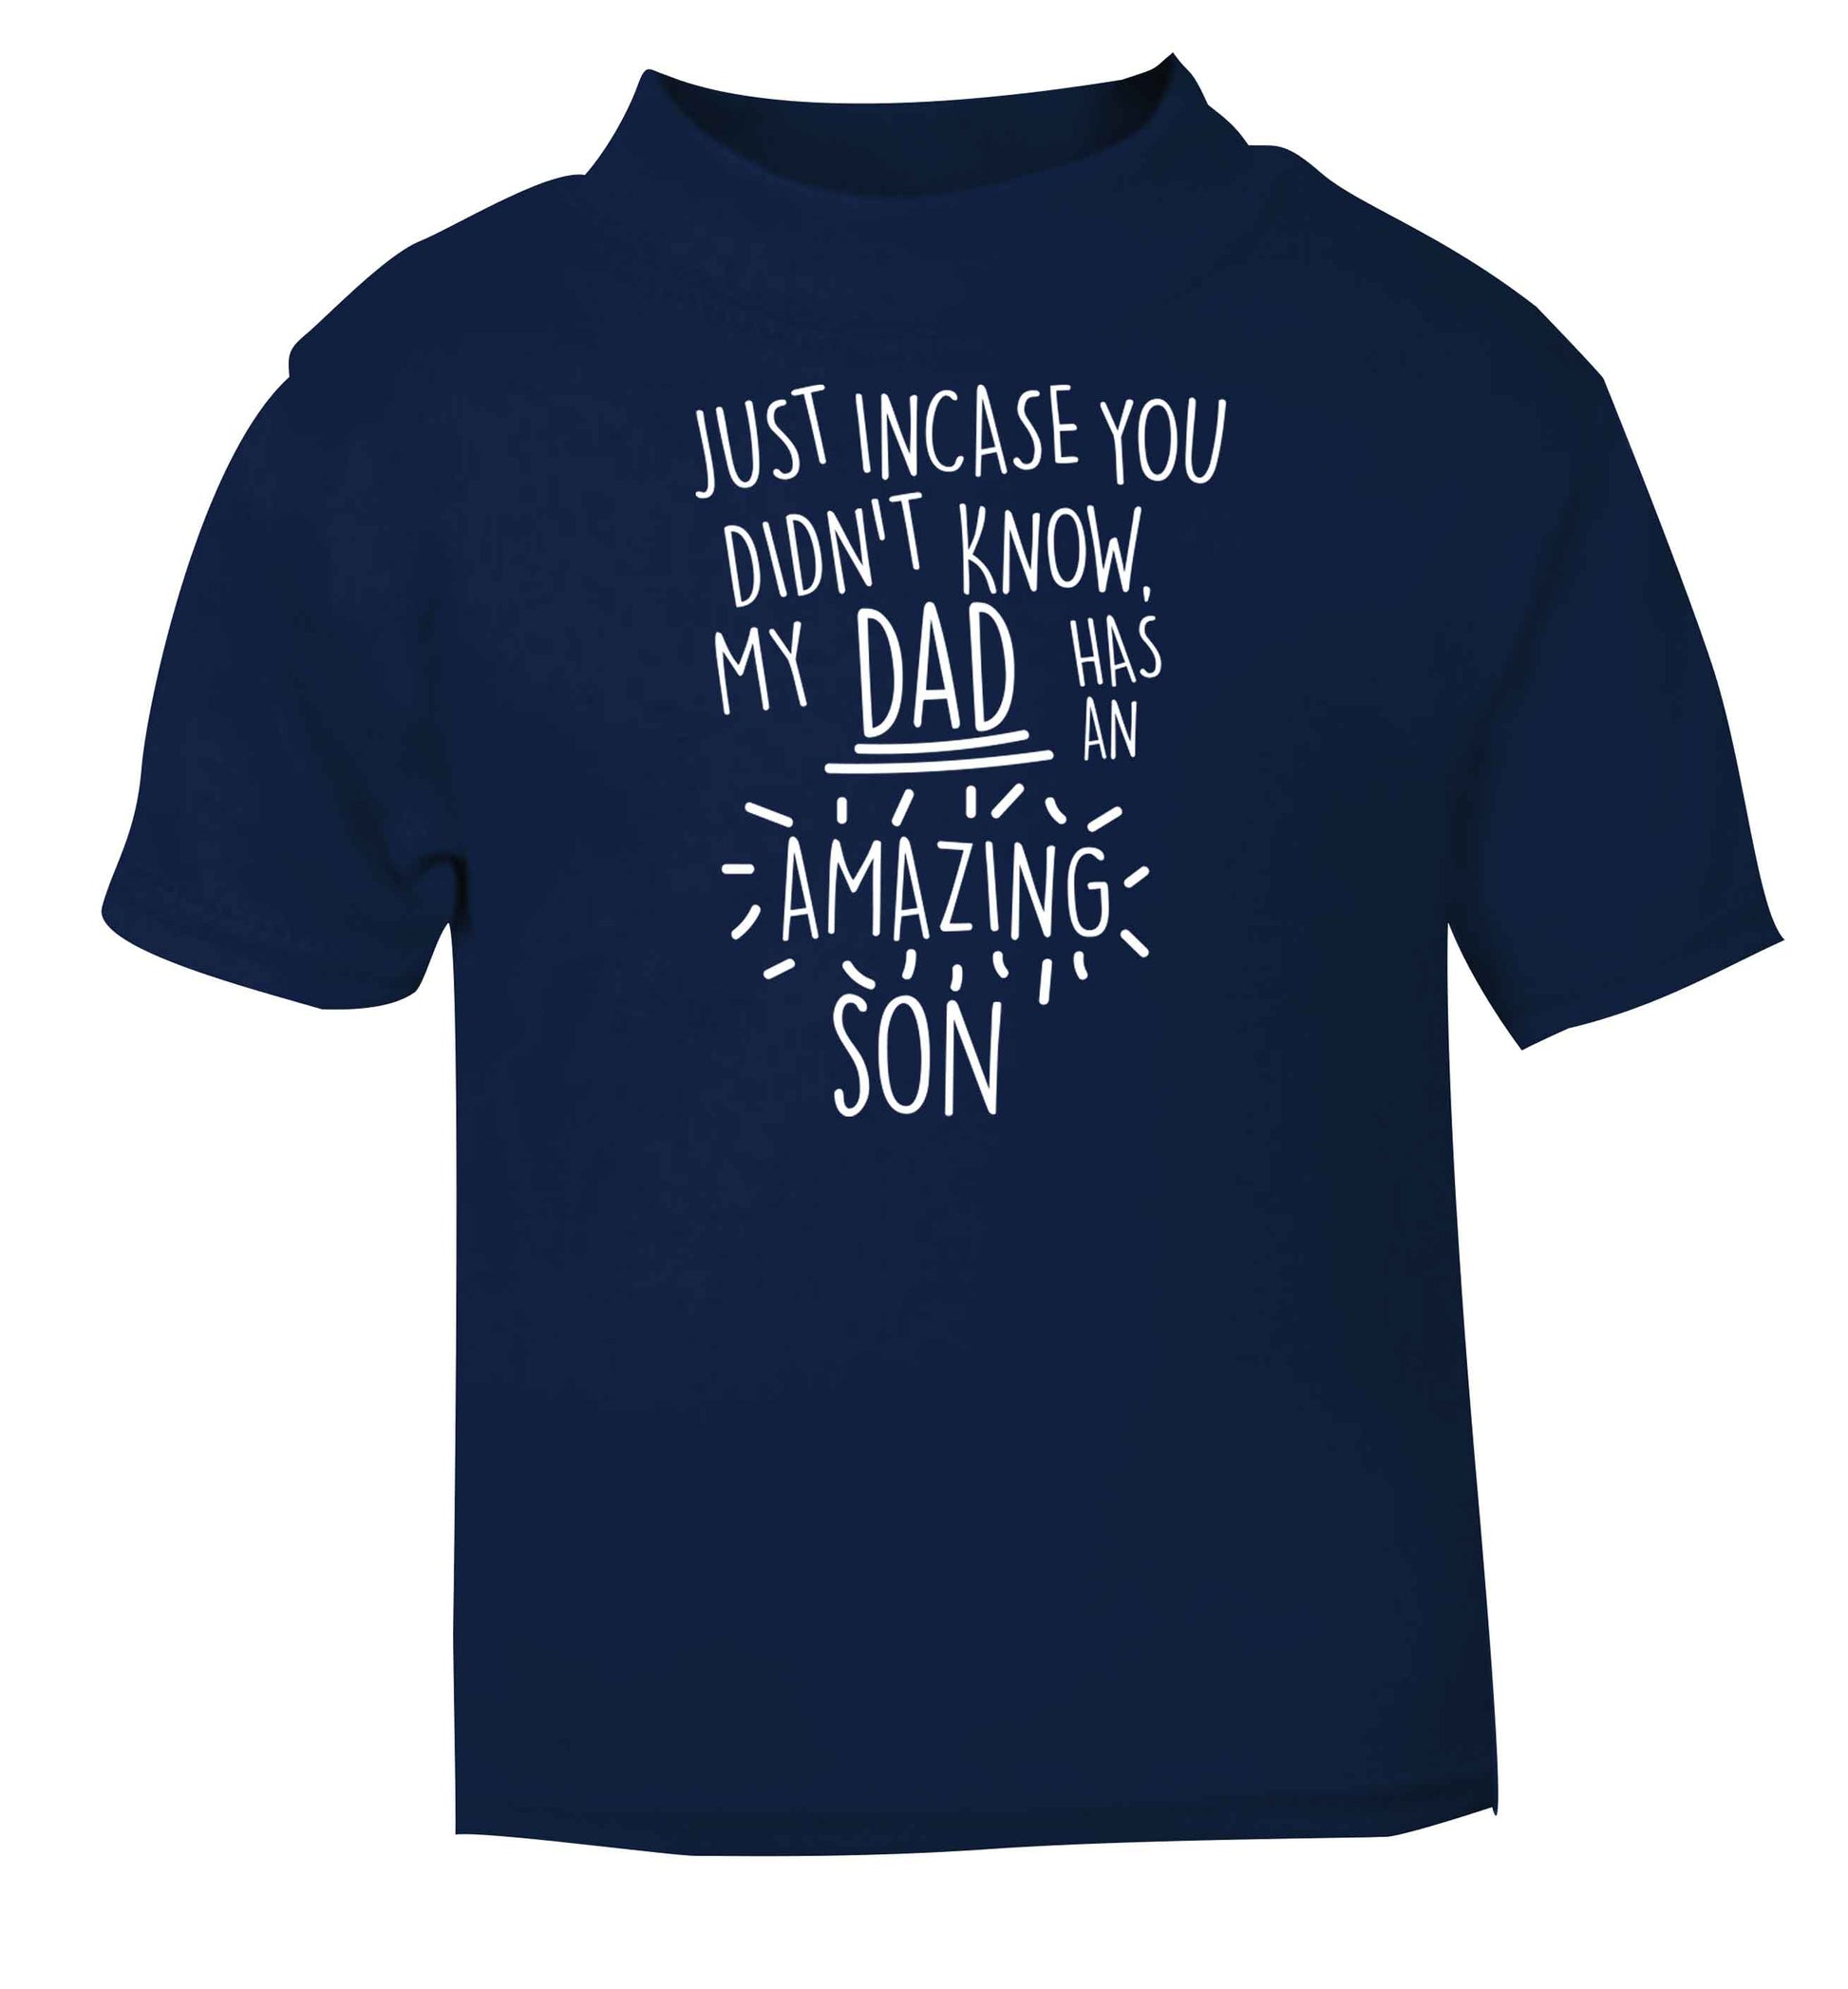 Just incase you didn't know my dad has an amazing son navy baby toddler Tshirt 2 Years